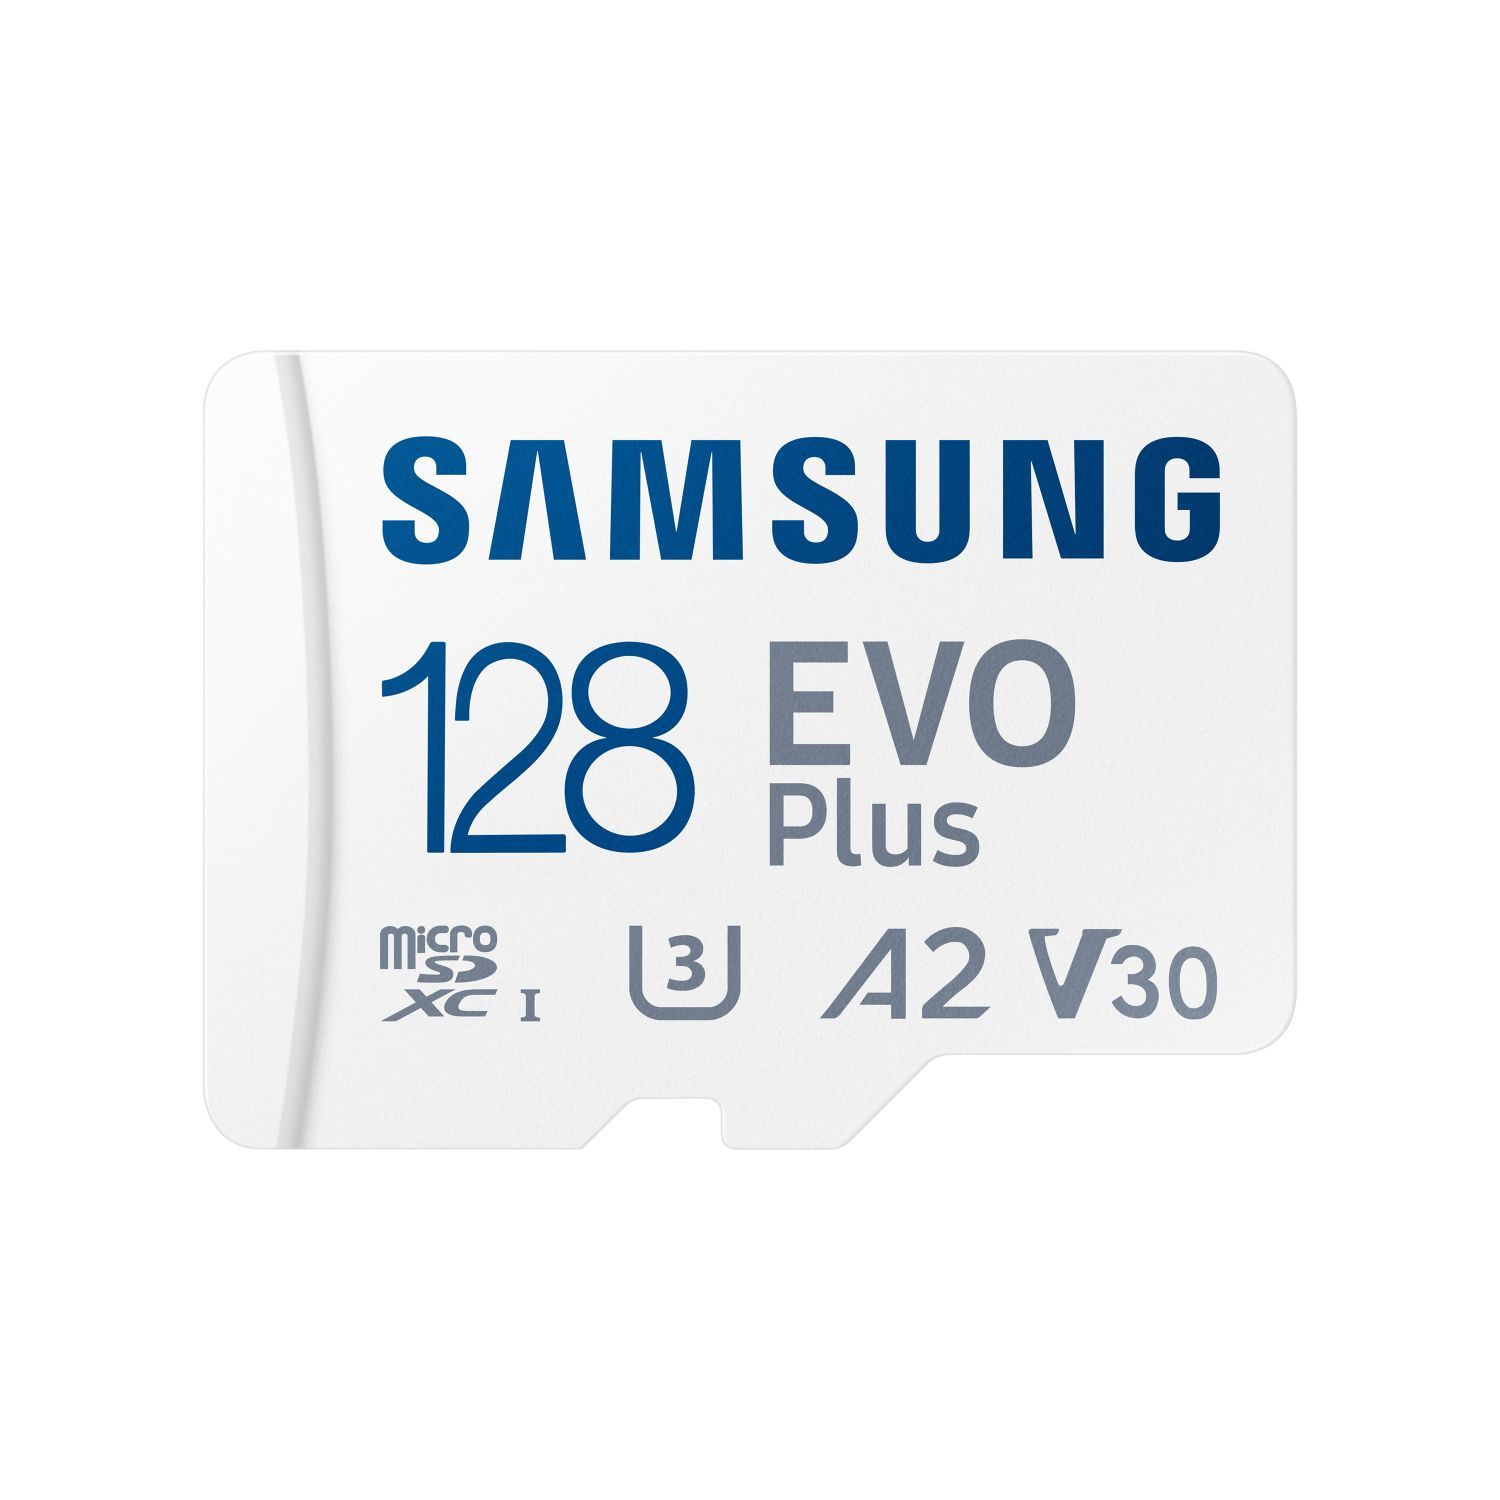 Memory for Samsung mobile devices